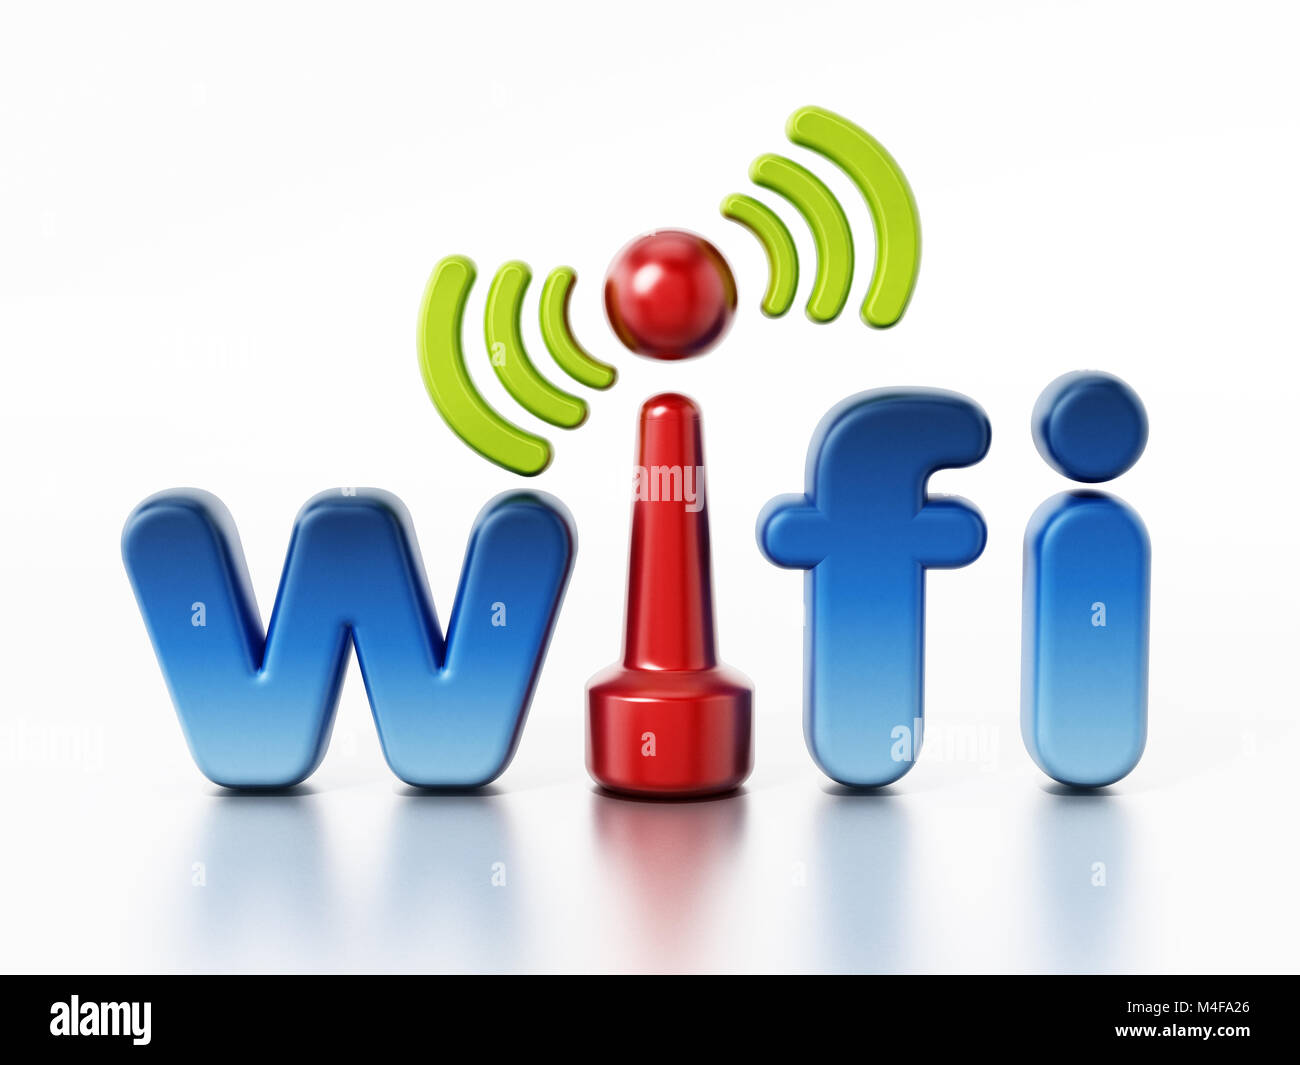 Wifi logo and wireless connection symbol. 3D illustration. Stock Photo